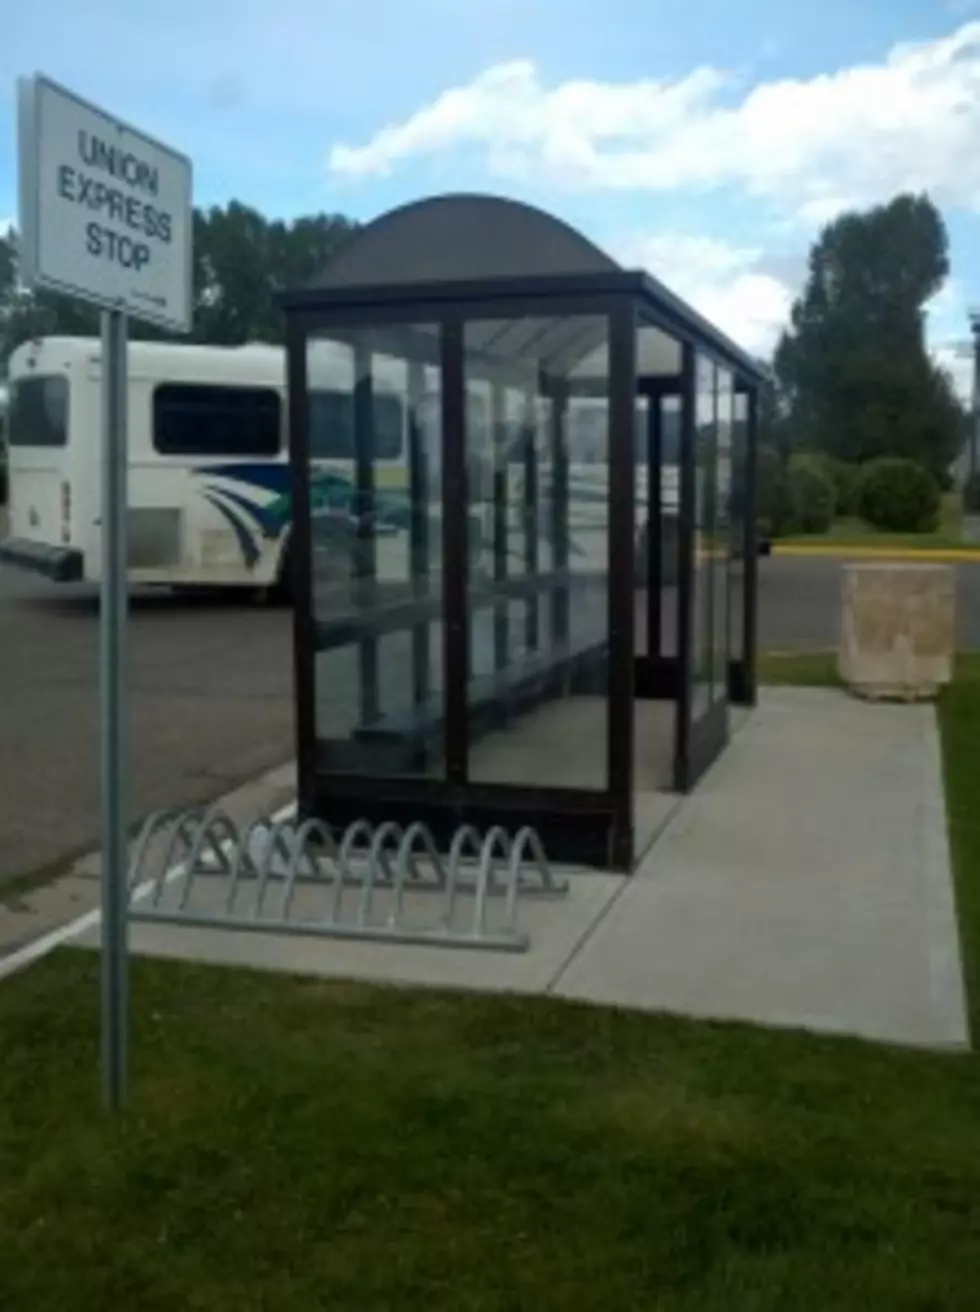 University Of Wyoming Renames Transit &#038; Parking Service&#8217;s To &quot;Roundup&quot;